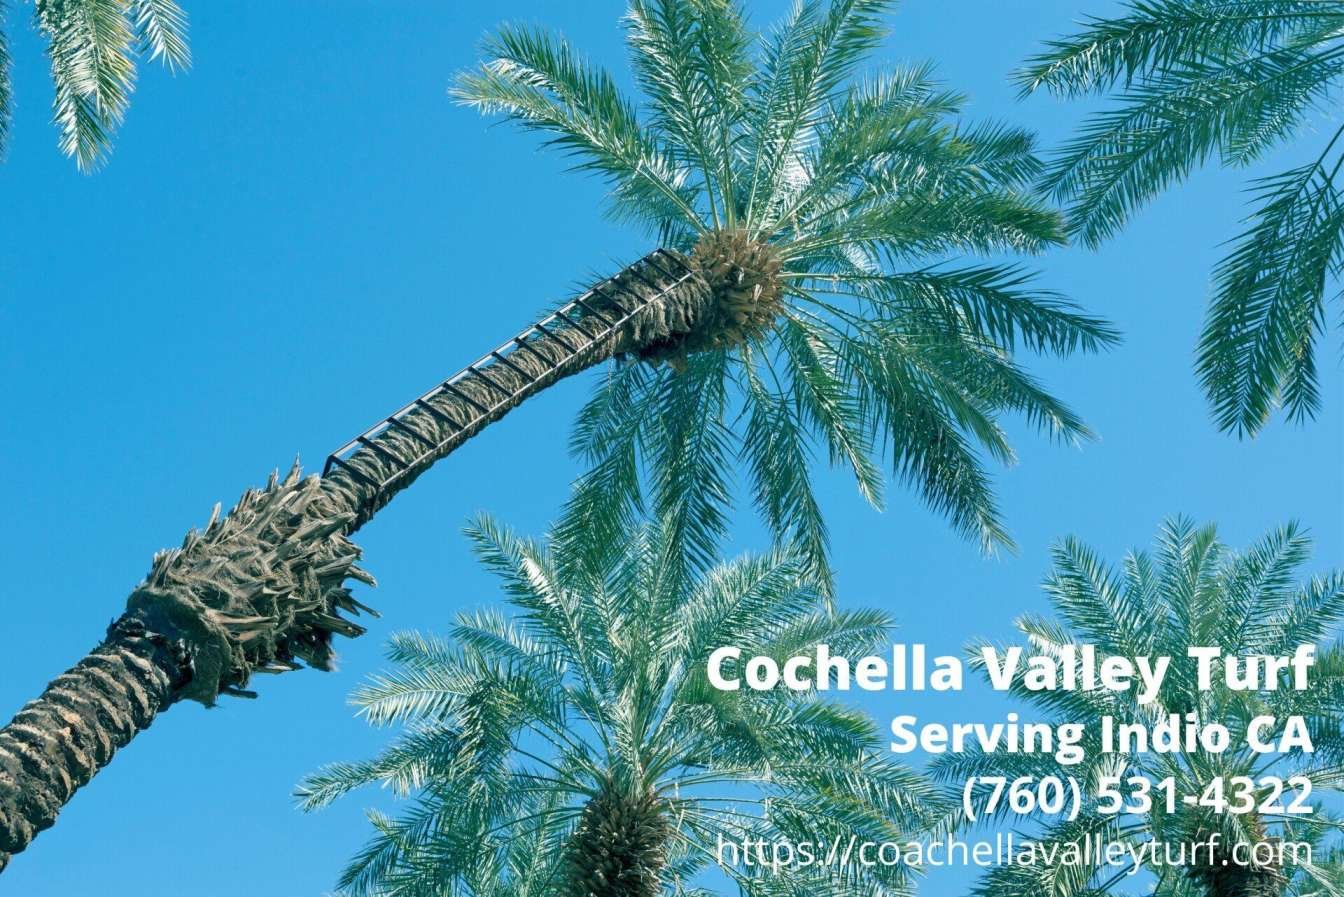 ladder chained palm tree in Indio CA with text by Coachella Valley Turf